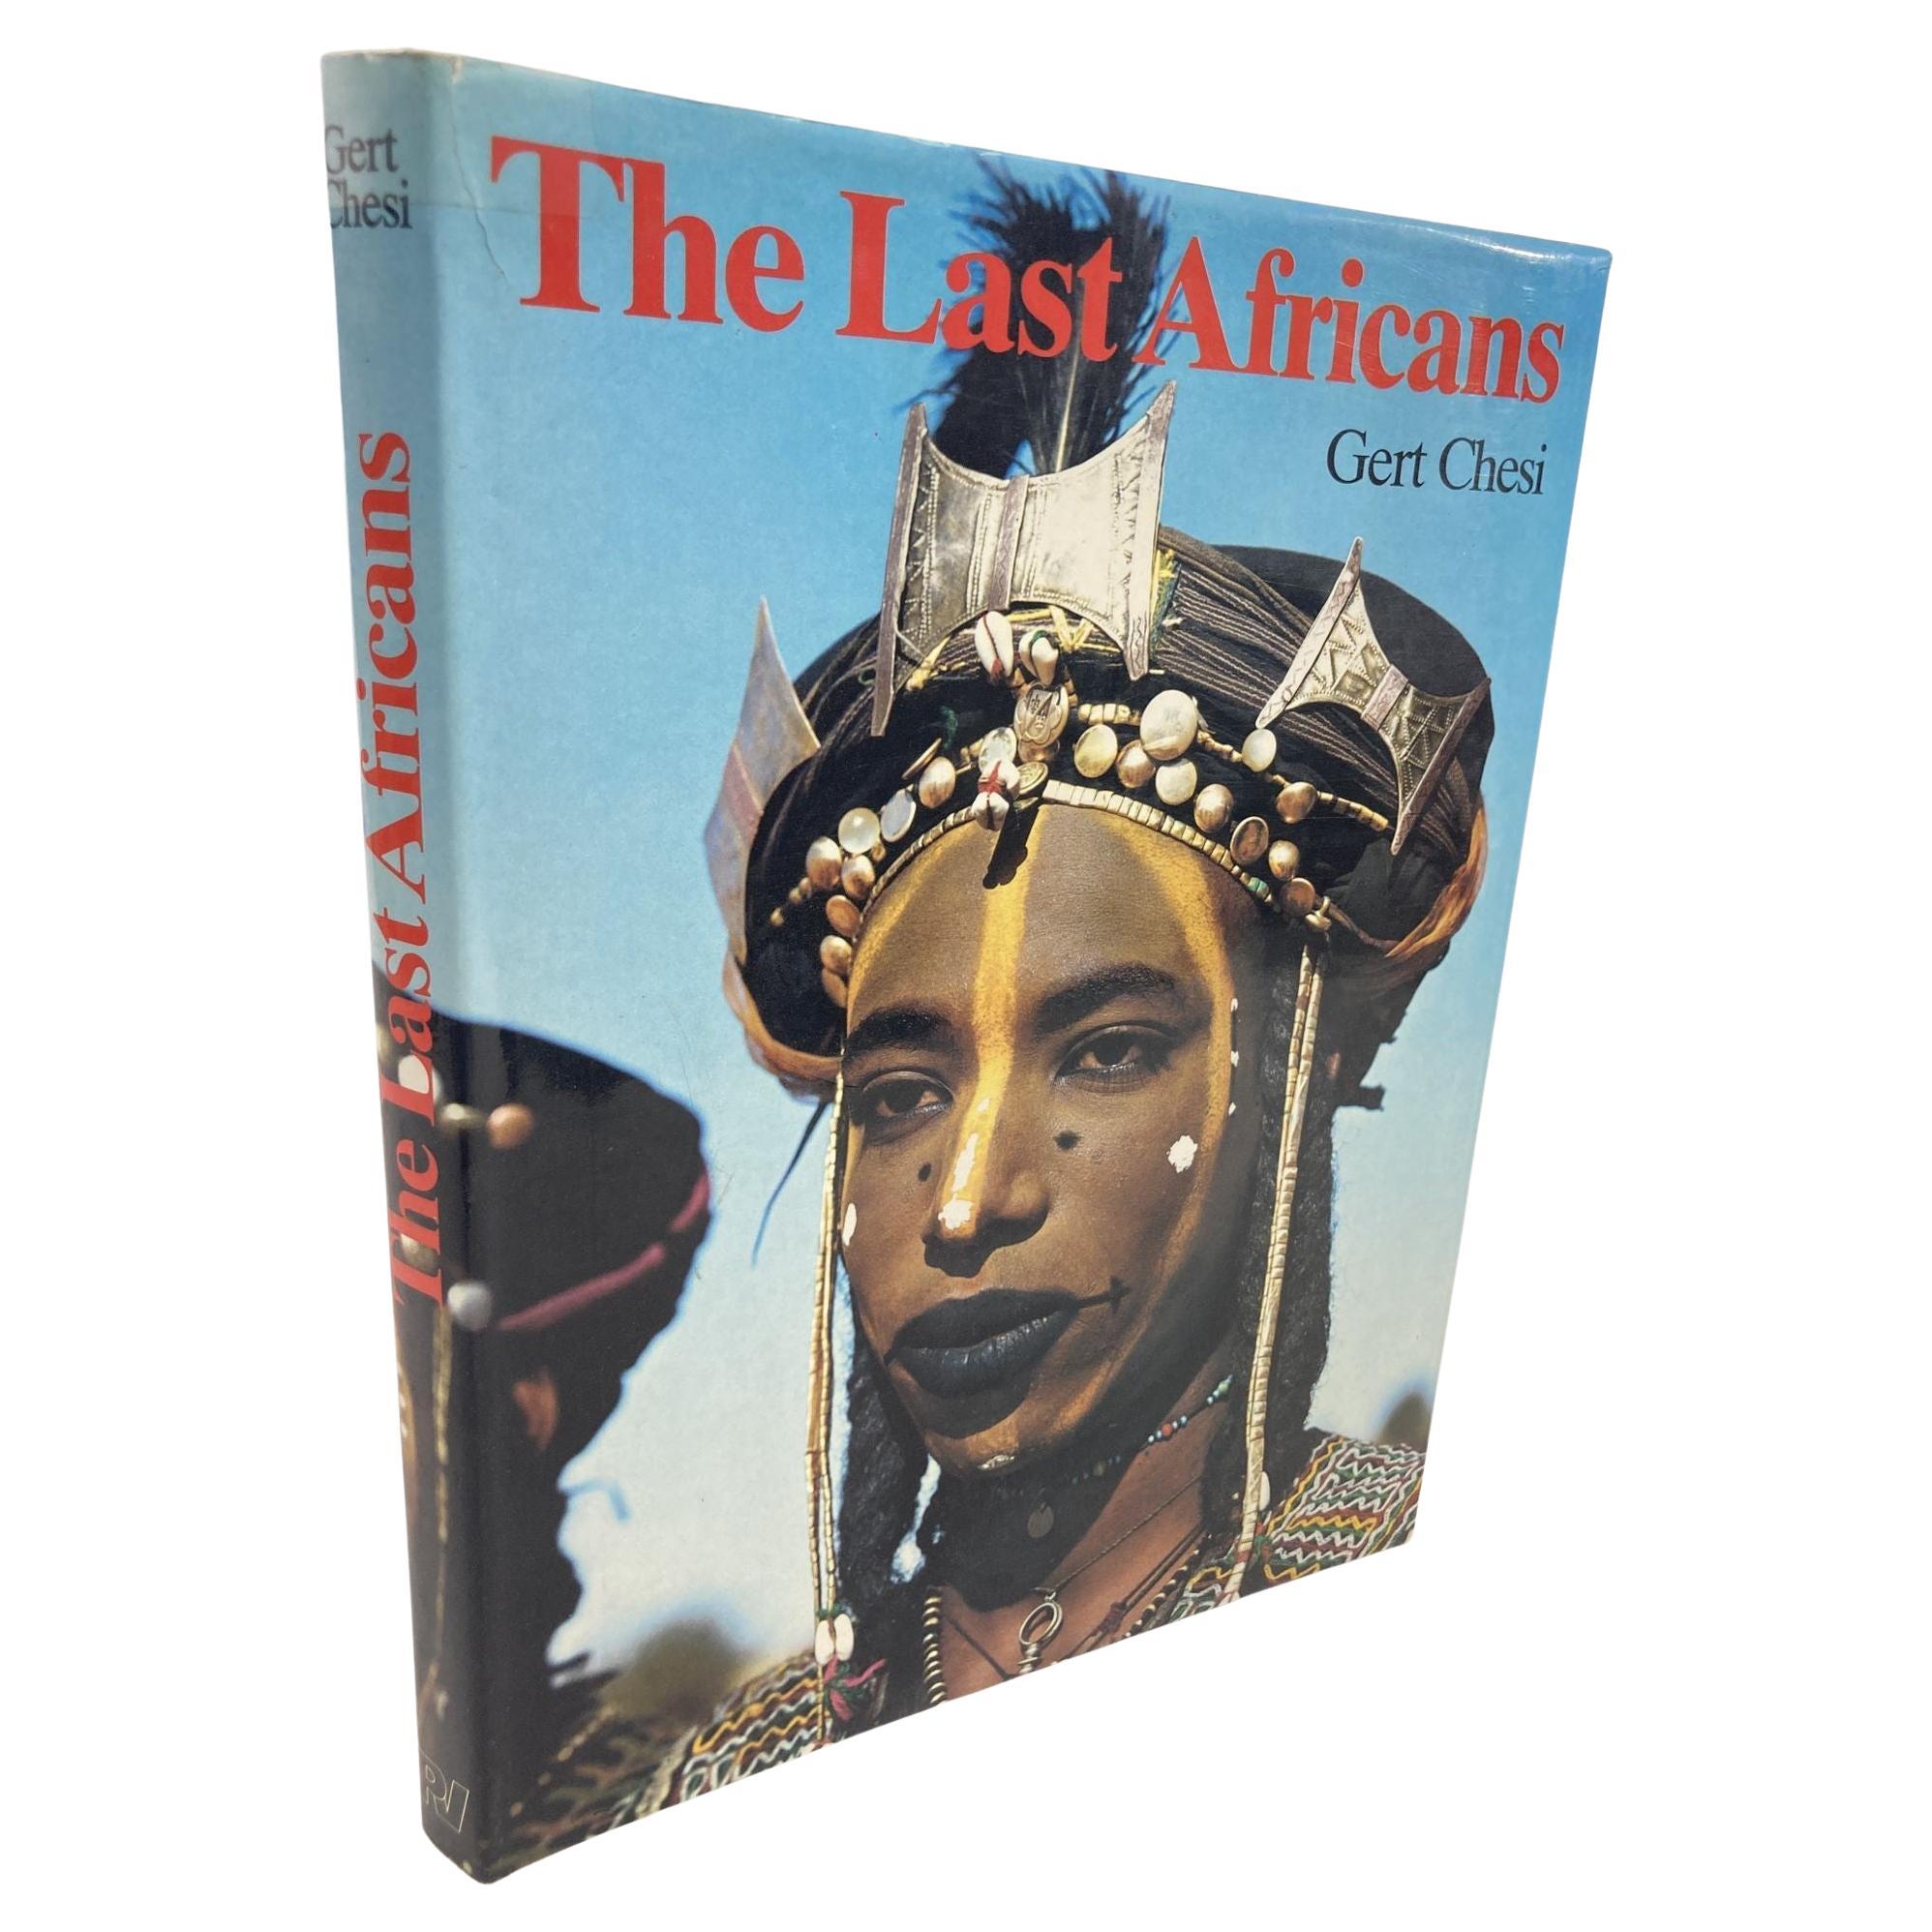 The Last Africans by Gert Chesi Hardcover Book 1981